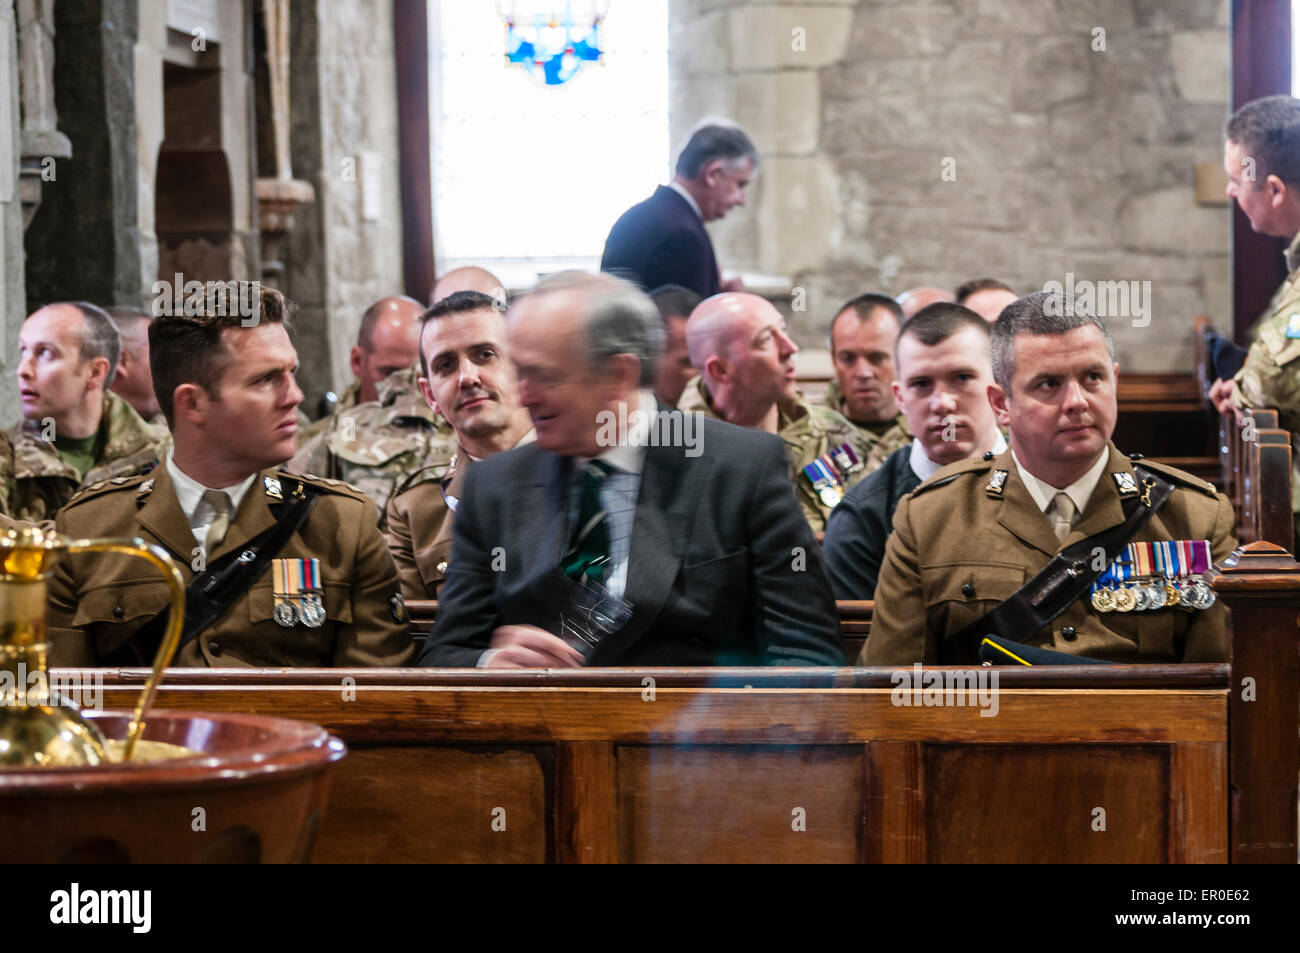 Carrickfergus, Northern Ireland. 23rd May, 2015. Soldiers sitting in pews in an old church Credit:  Stephen Barnes/Alamy Live News Stock Photo